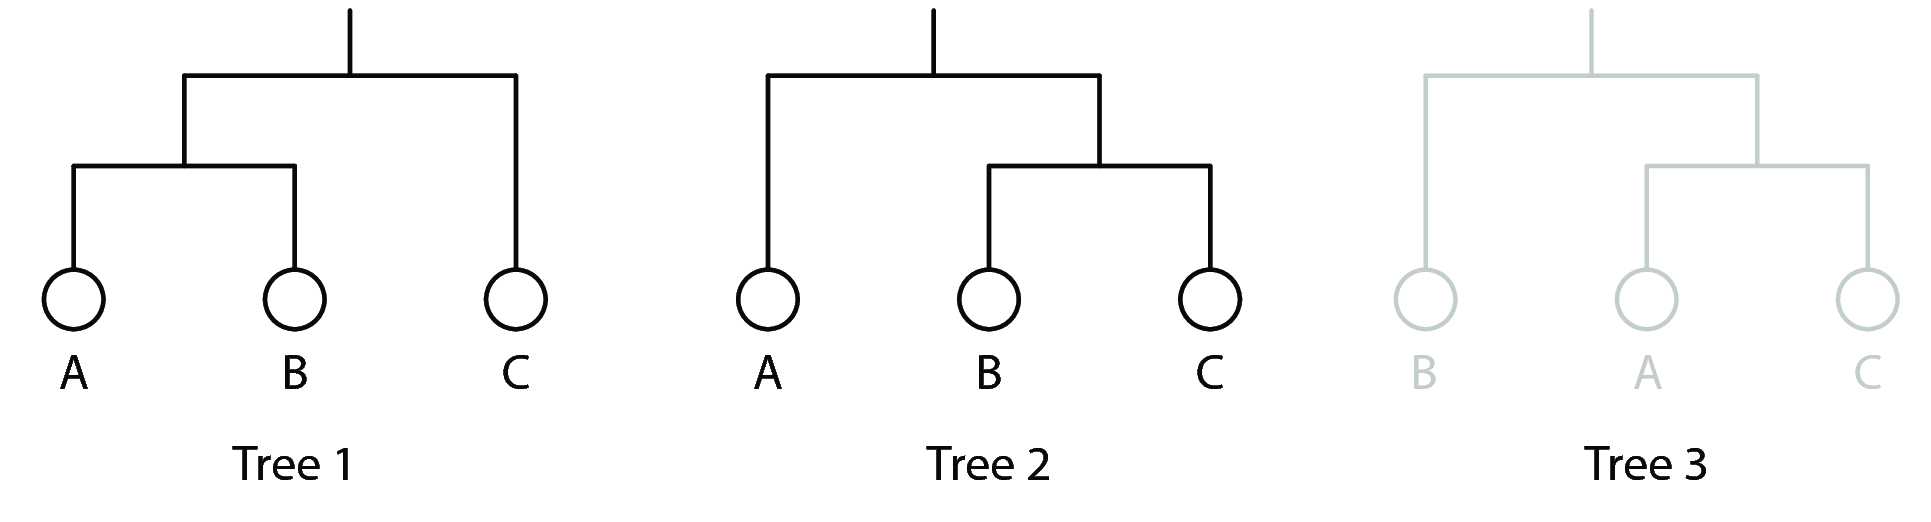 Figure 2: Maximum parsimony-based reconstruction of the character states. The non-parsimonious tree (Tree 3) is greyed out.